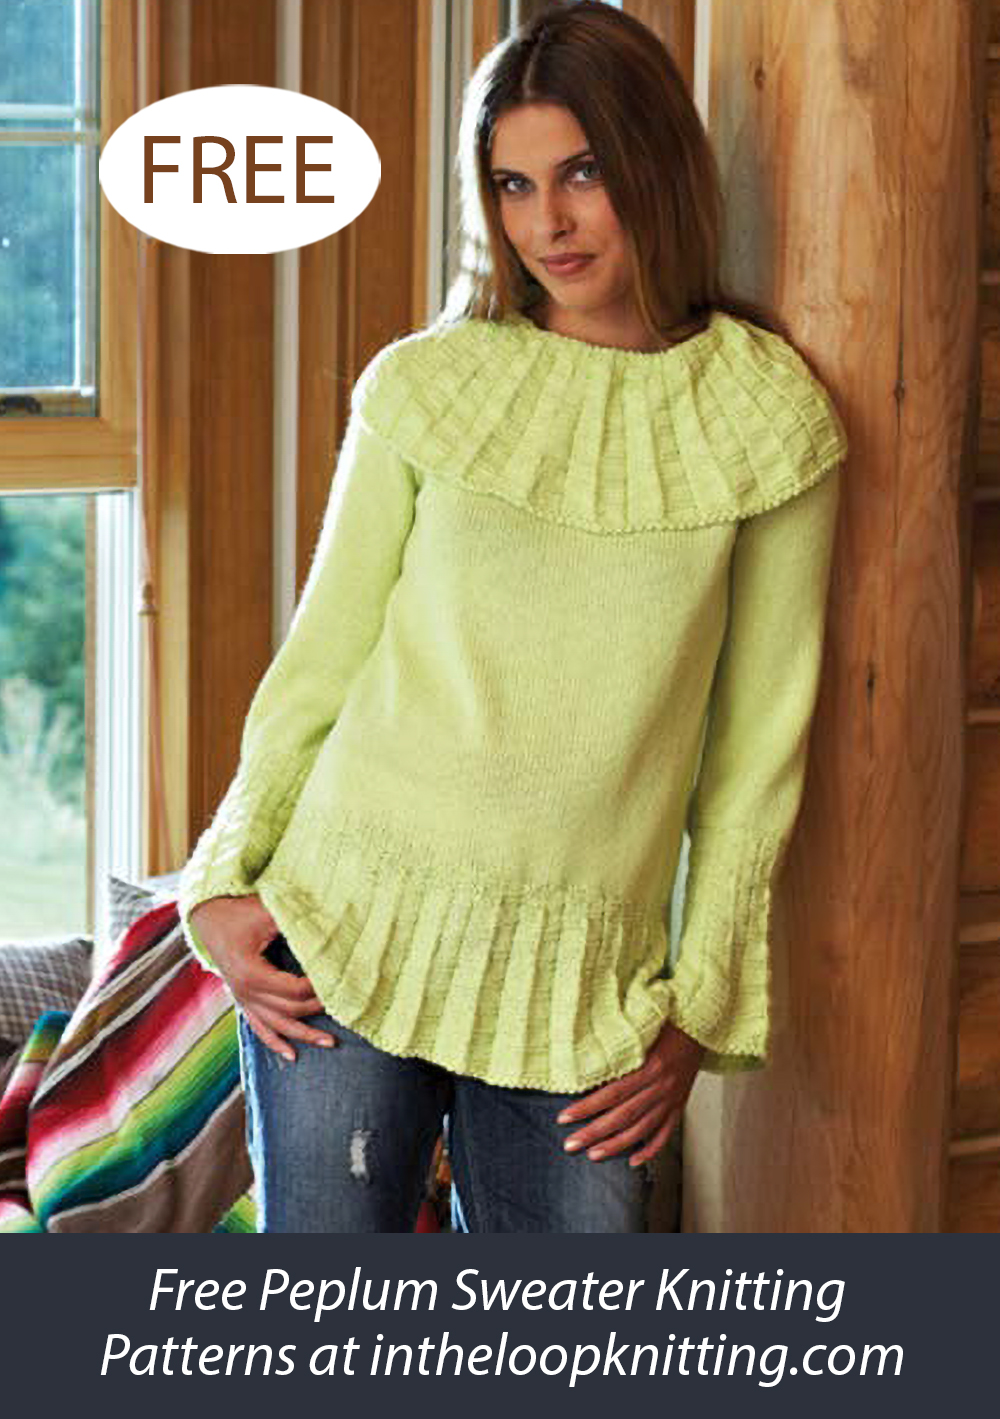 Free Ladies’ Sweater with Pleated Flounce Knitting Pattern